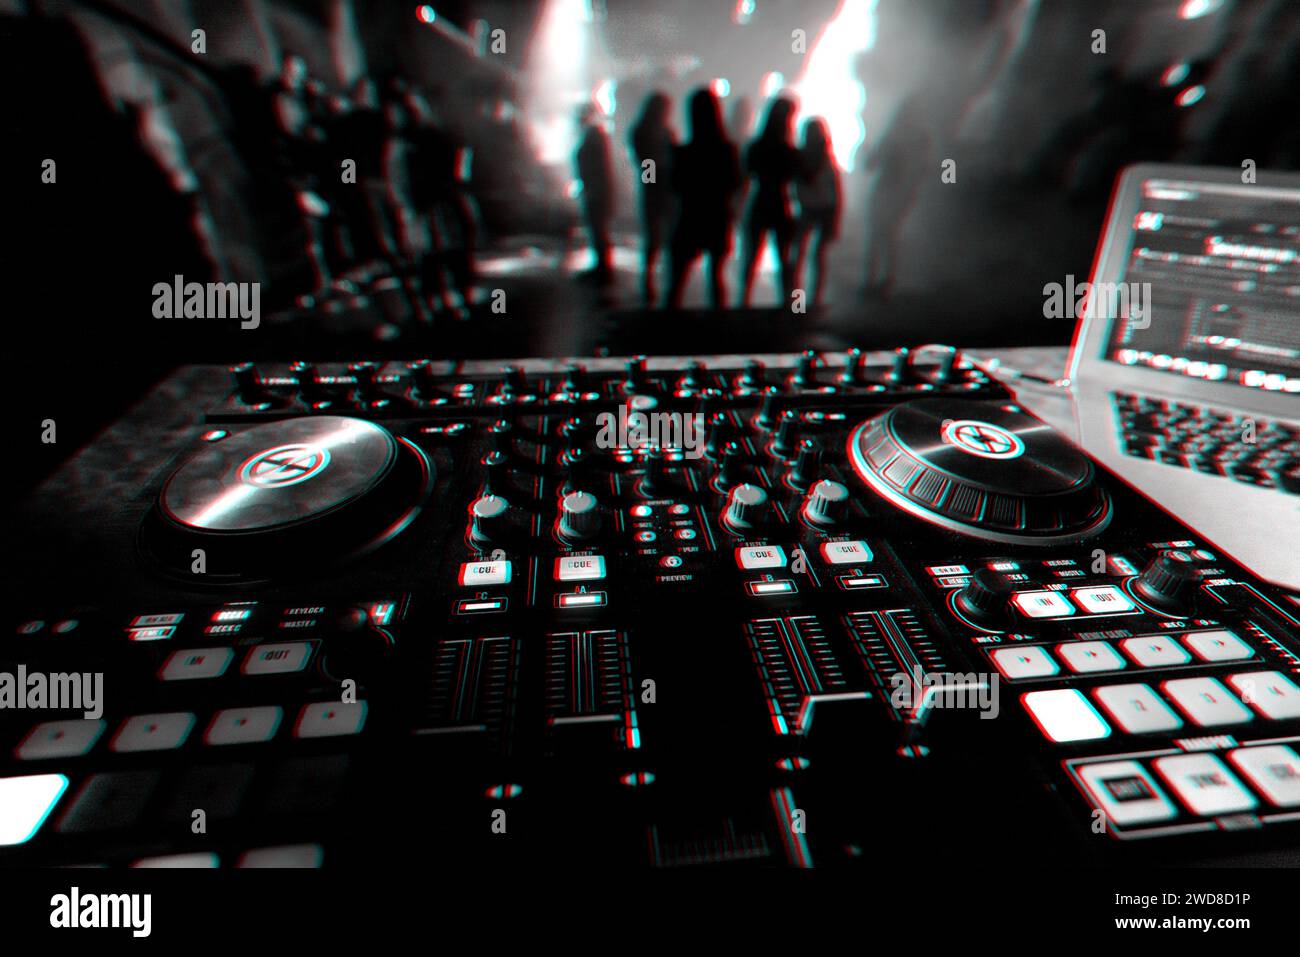 DJ mixer controller Board for professional mixing of electronic music in a nightclub at a party with dancing people in the background. Black and white Stock Photo